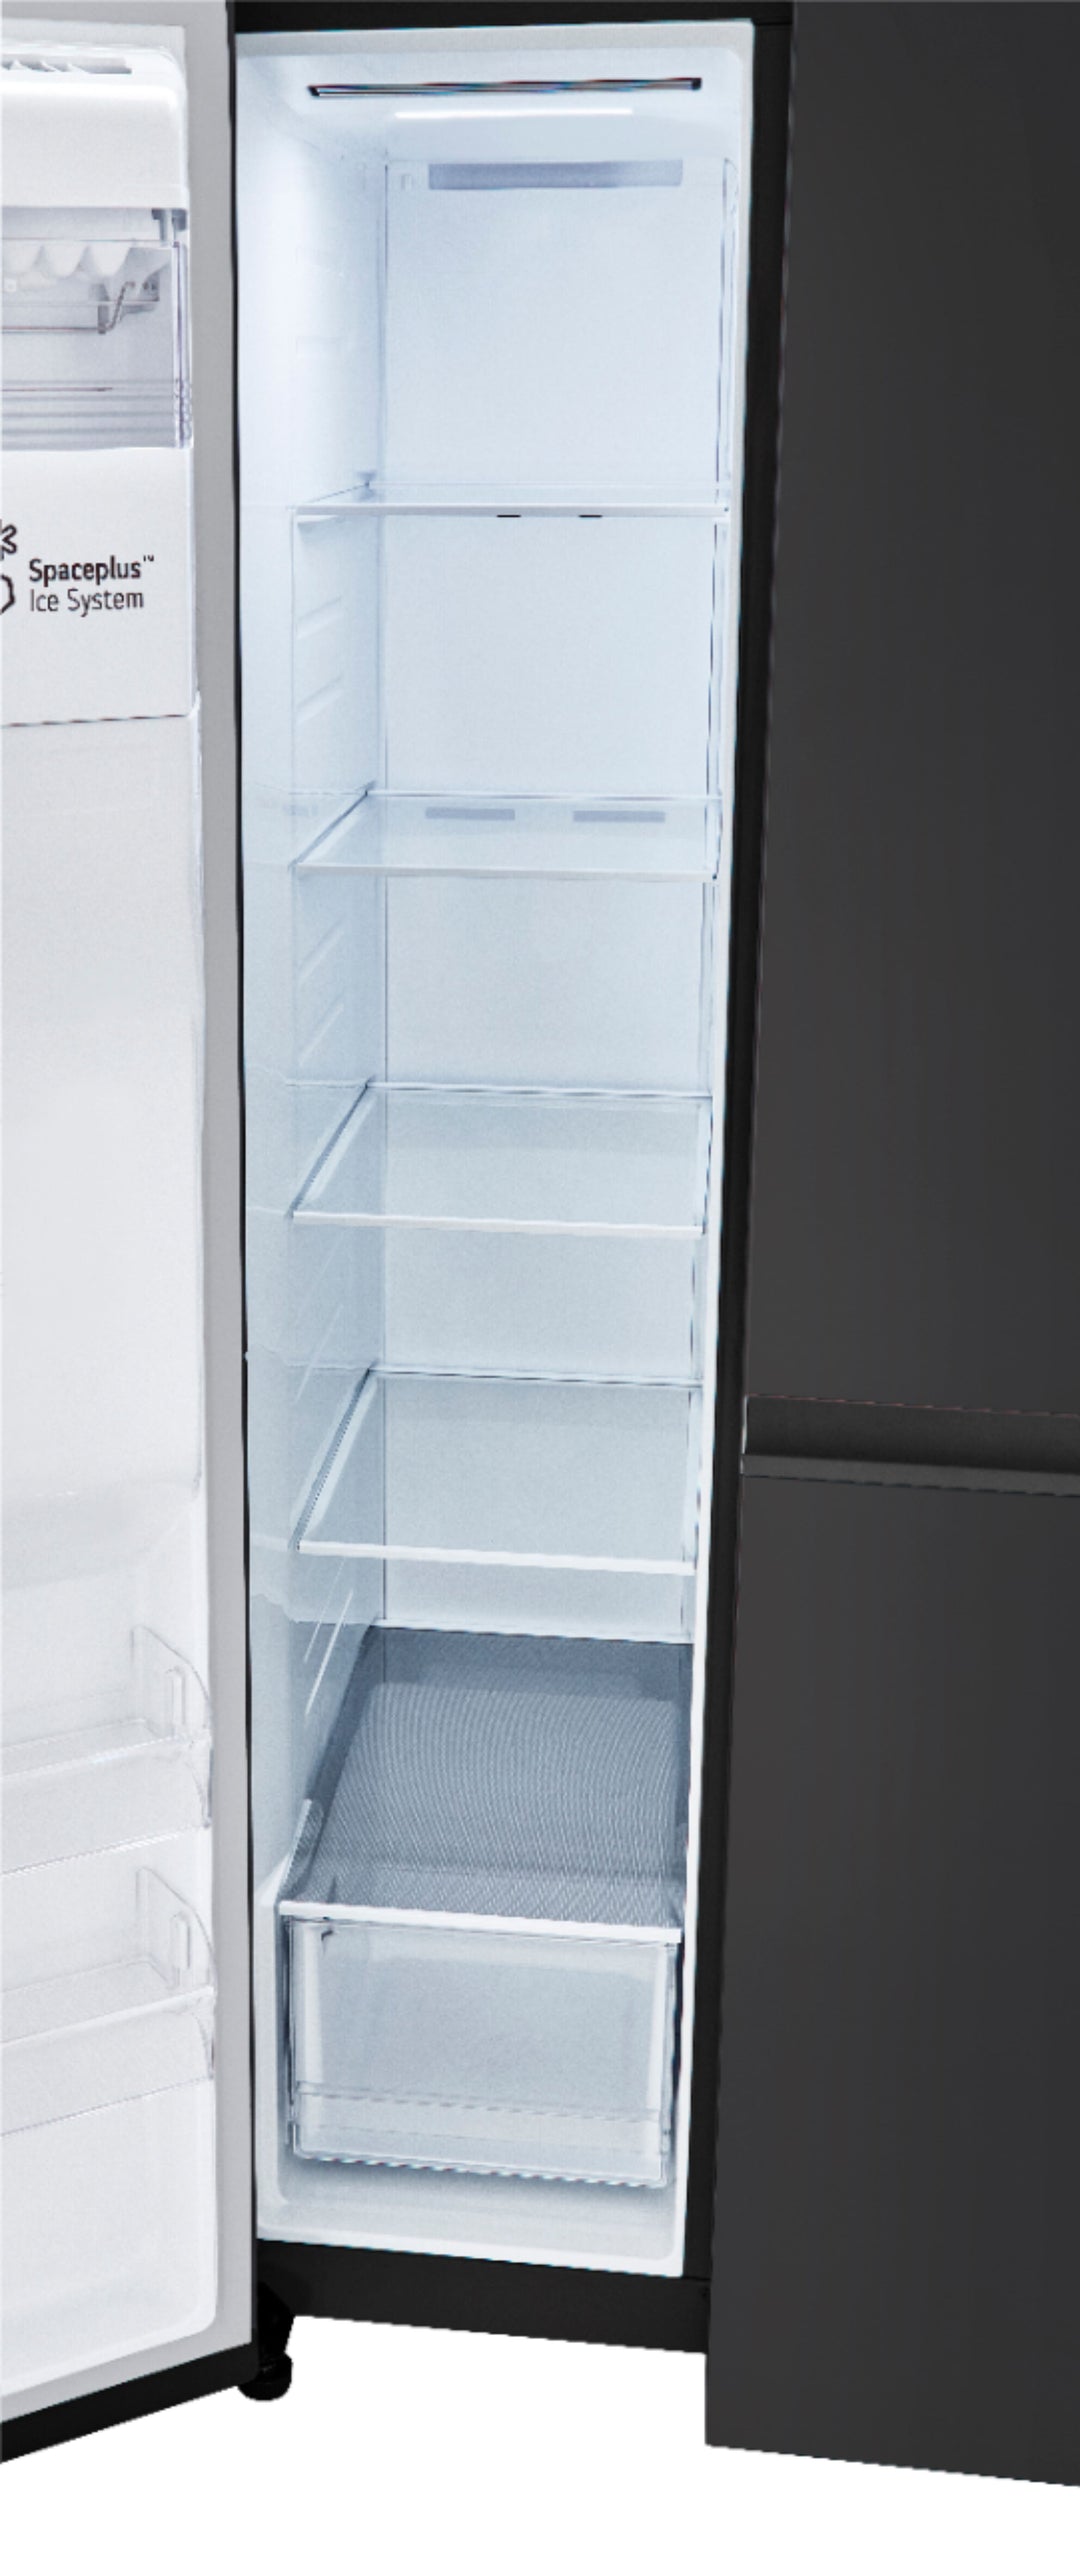 LG - 27.2 cu ft Side by Side Refrigerator with SpacePlus Ice - Smooth black_16